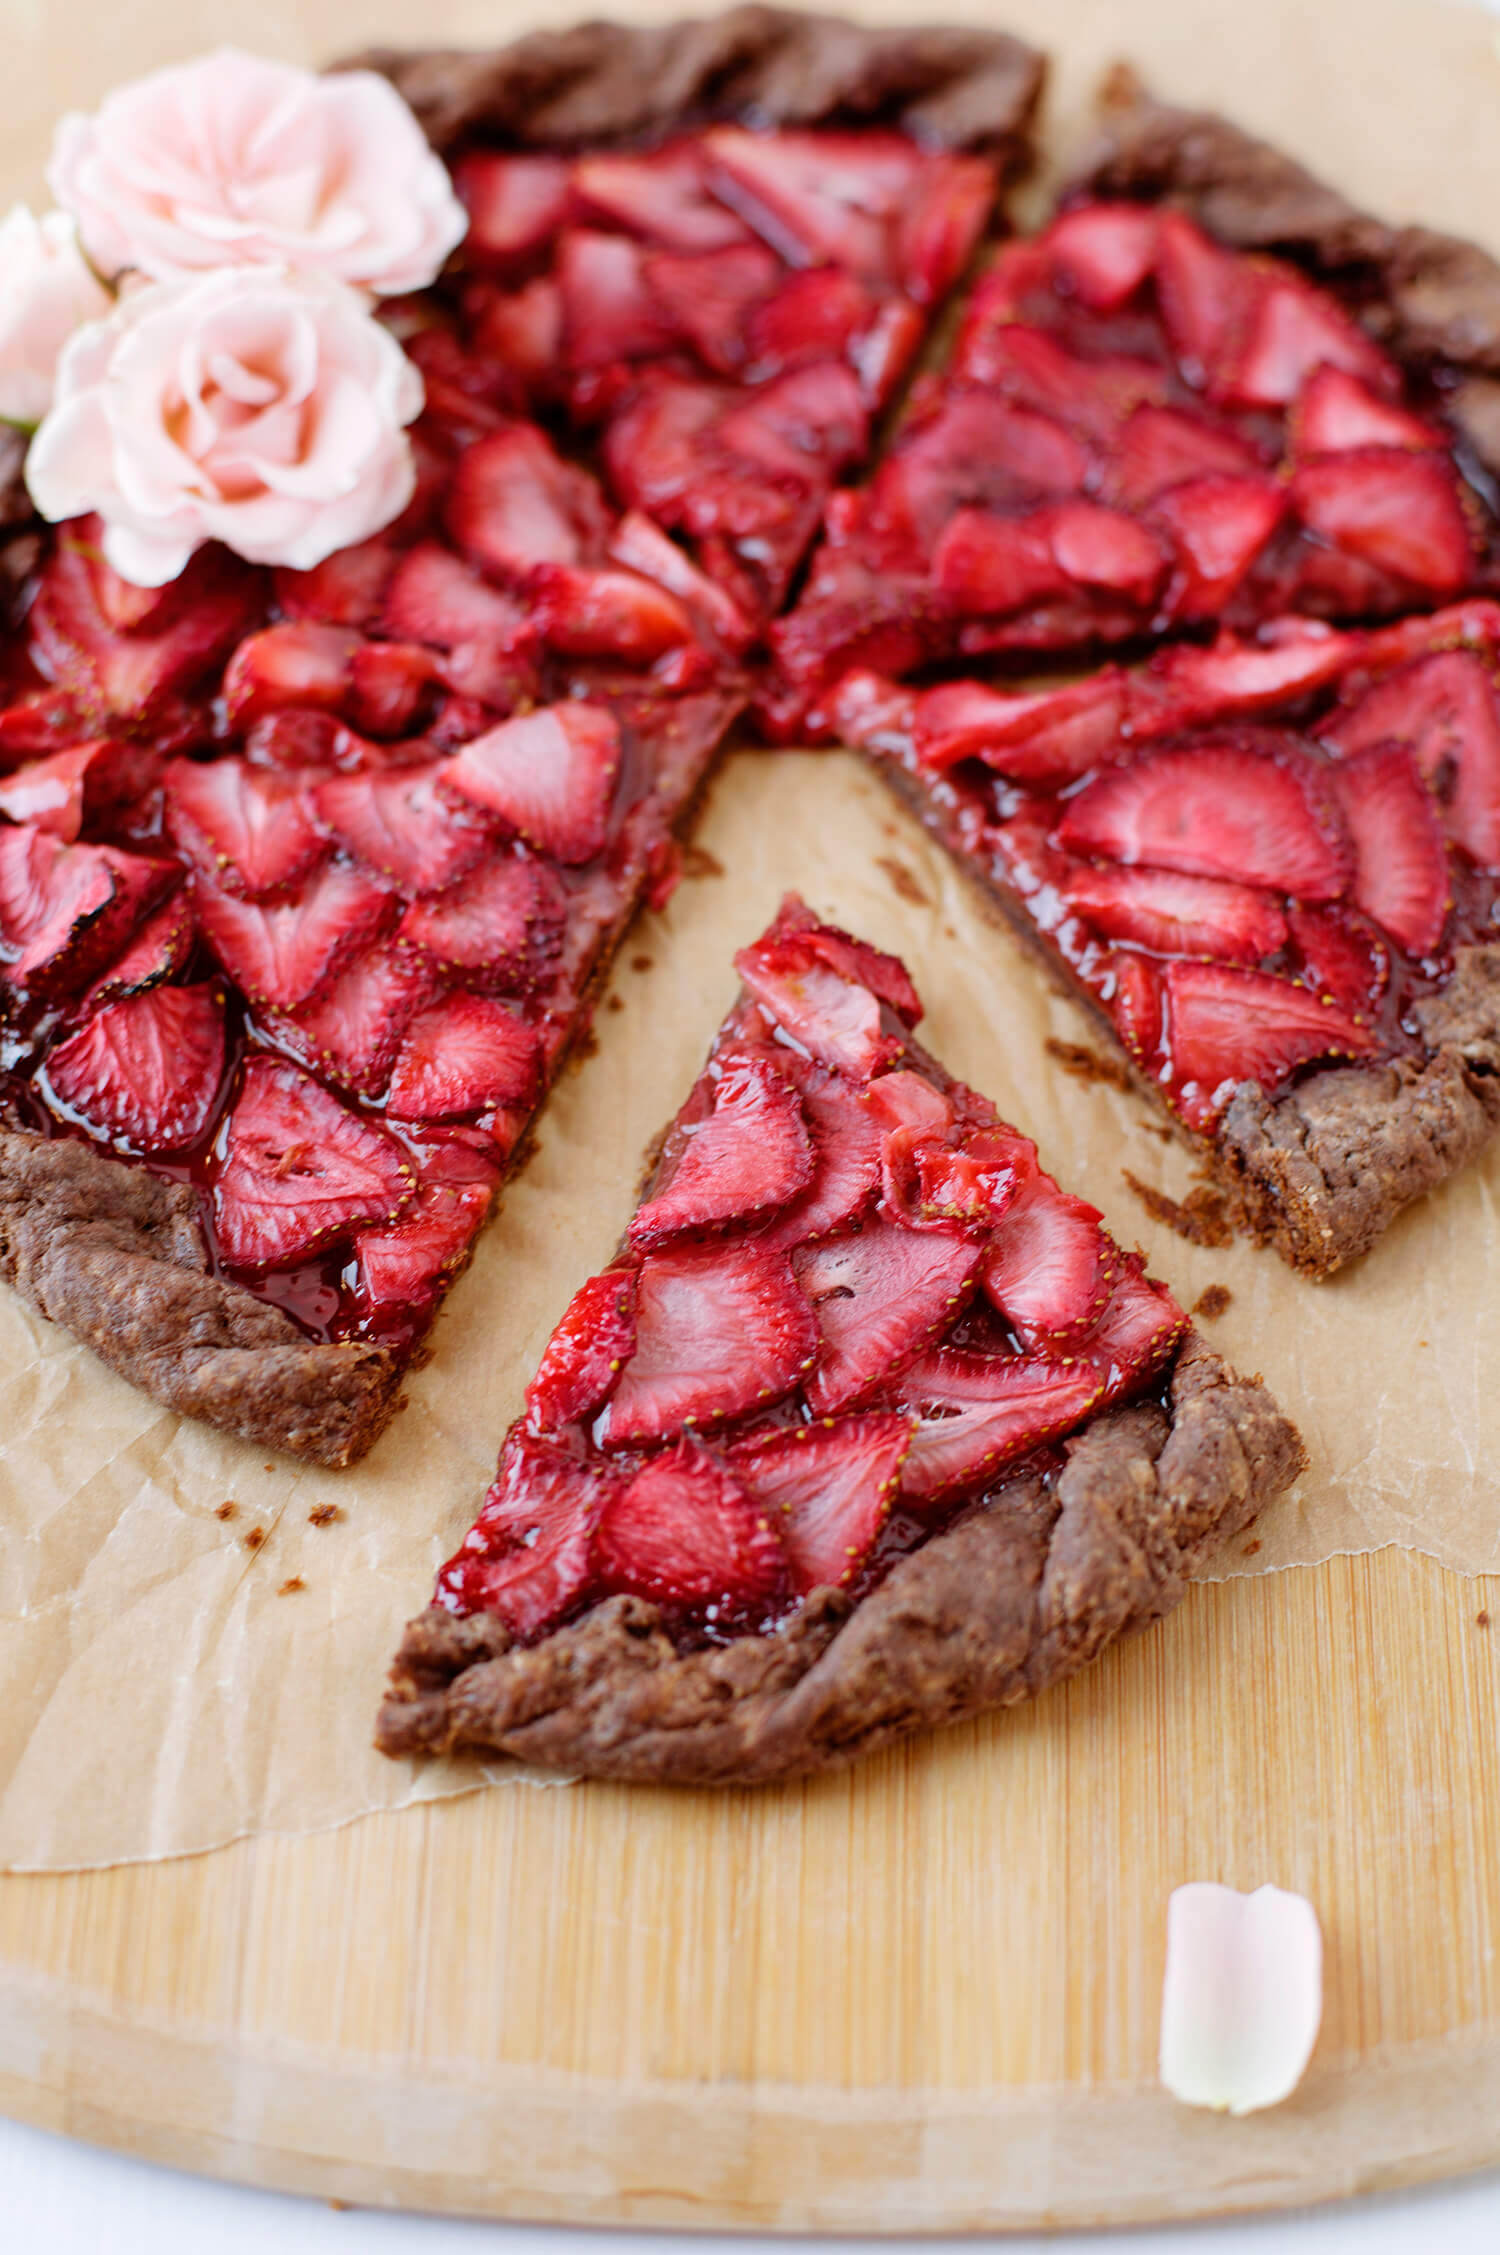 Strawberries and champagne galette with a chocolate crust (via abeautifulmess.com)